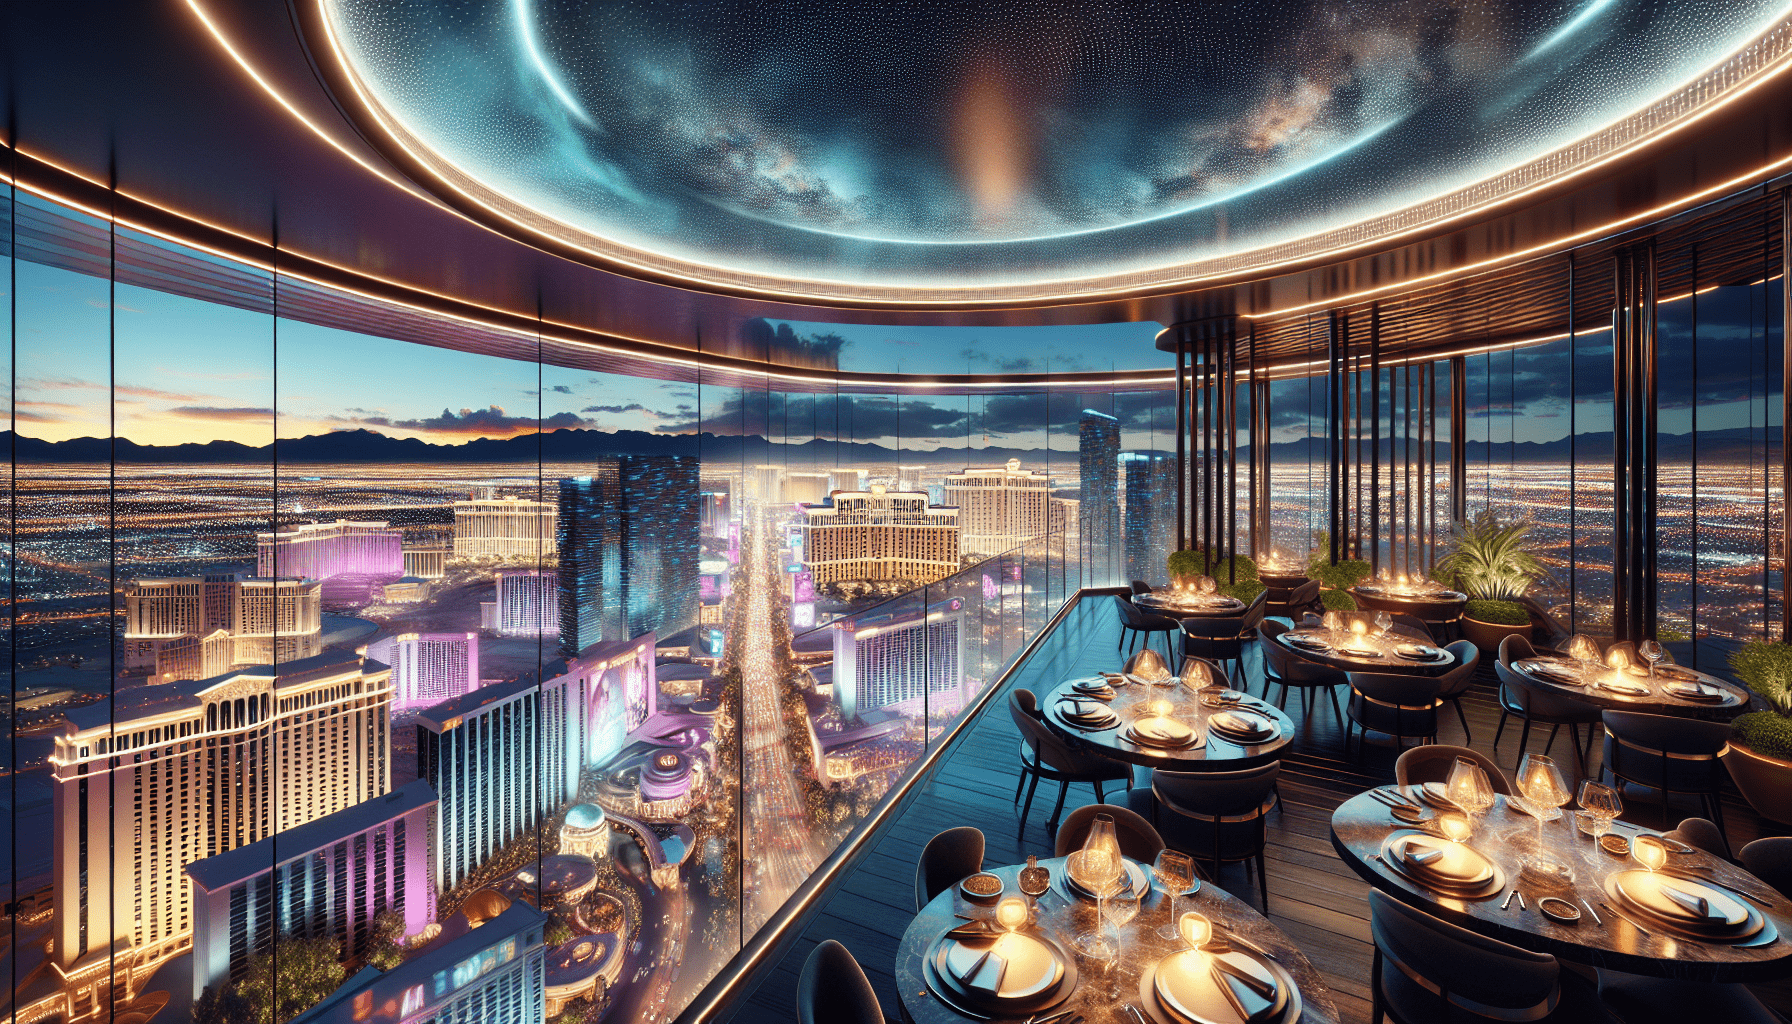 Can You Recommend Restaurants With Breathtaking Views In Las Vegas?